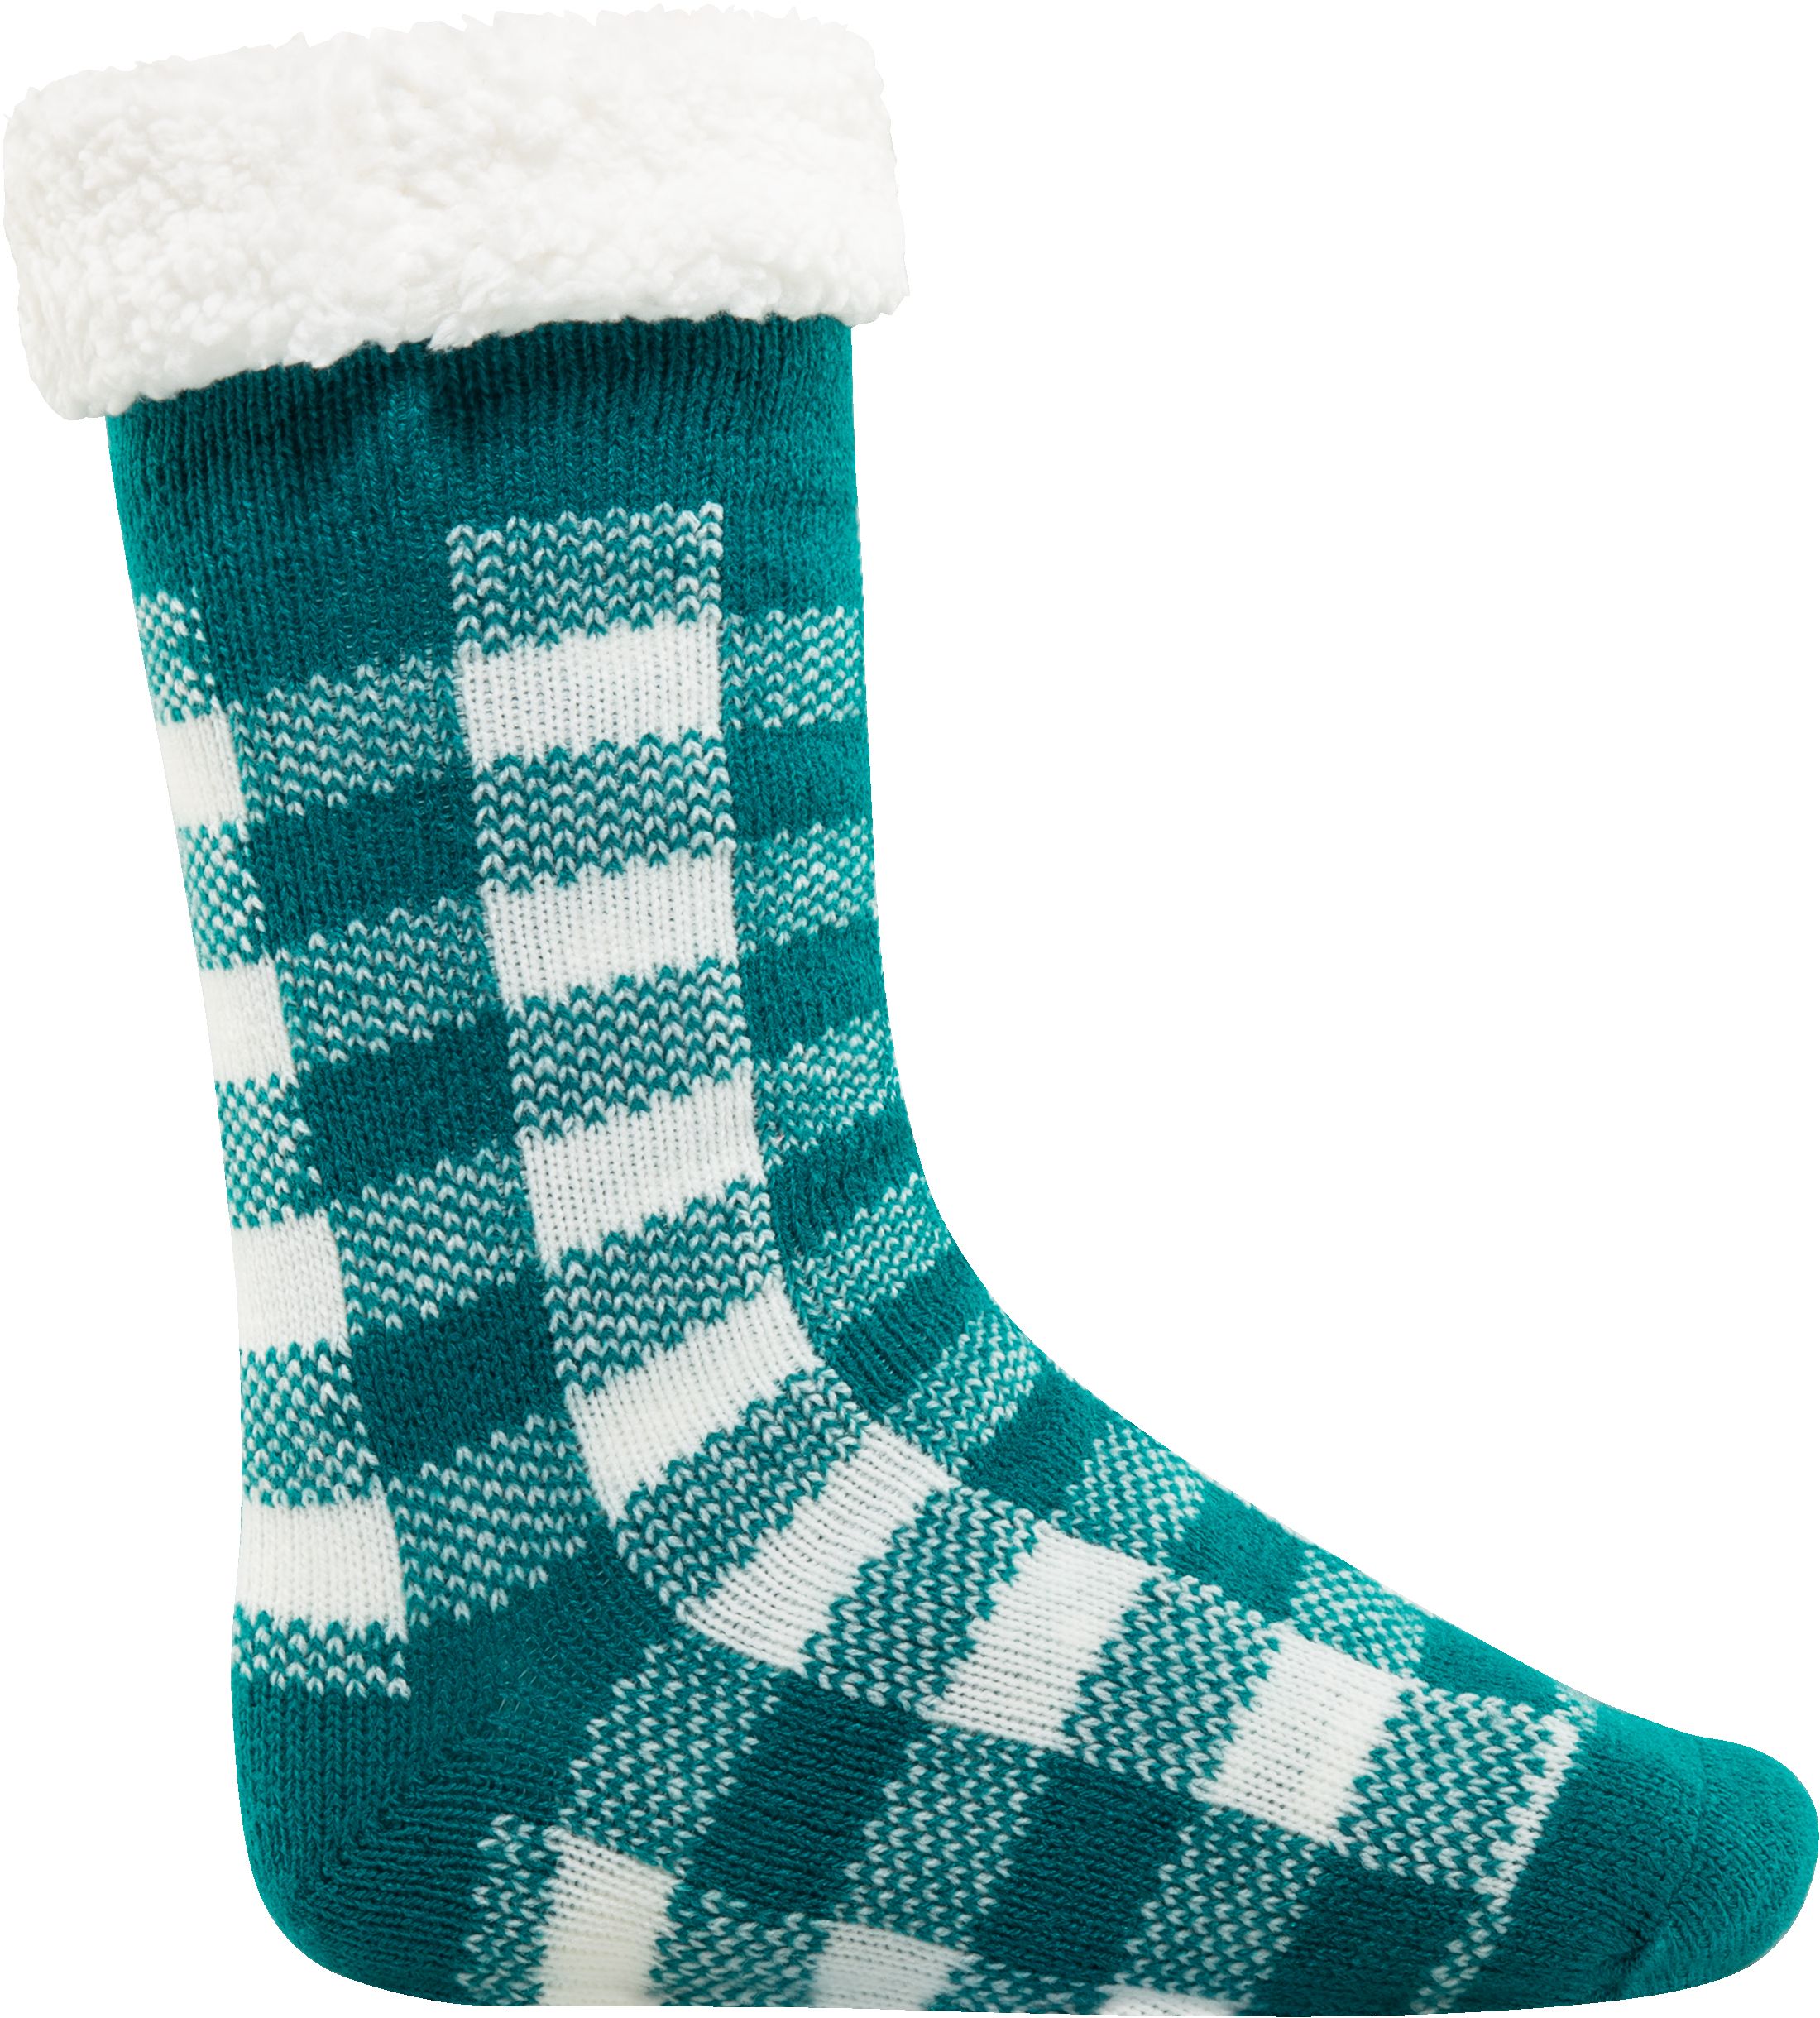 https://media-www.sportchek.ca/product/div-03-softgoods/dpt-78-winter-clothing-accessories/sdpt-03-boys/334103635/ripzone-g-cozy-sock-harbor-blue-q323--0030fca5-e517-4ae2-906d-61b3ac64486d-jpgrendition.jpg?imdensity=1&imwidth=1244&impolicy=mZoom